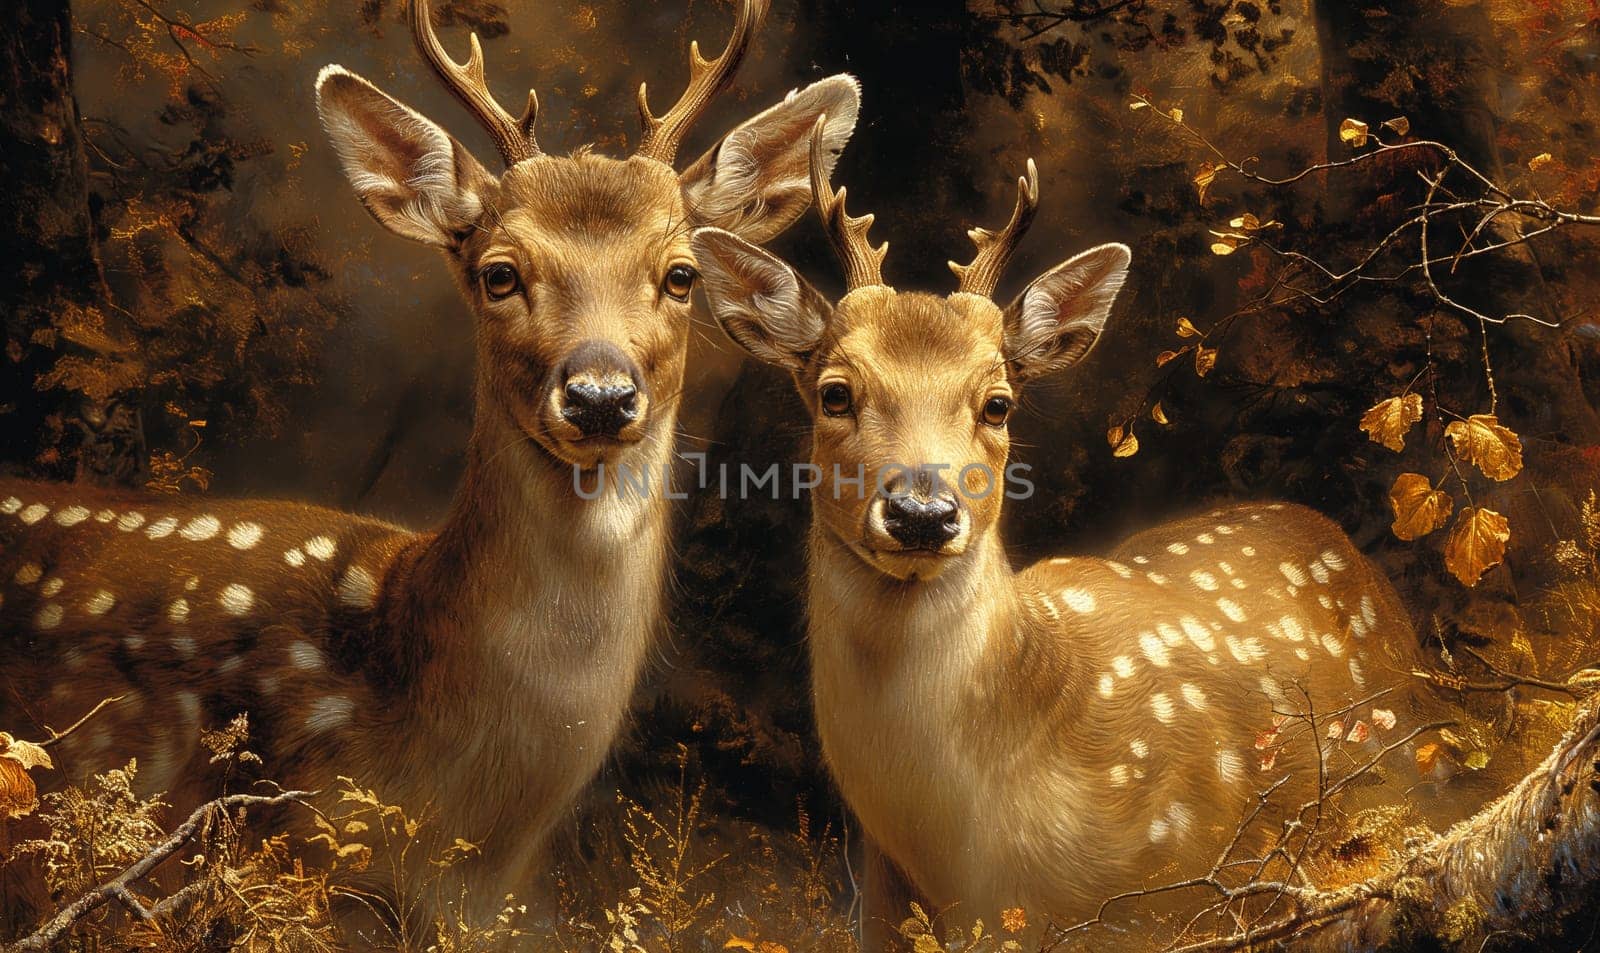 Two deer standing side by side in dense forest setting.